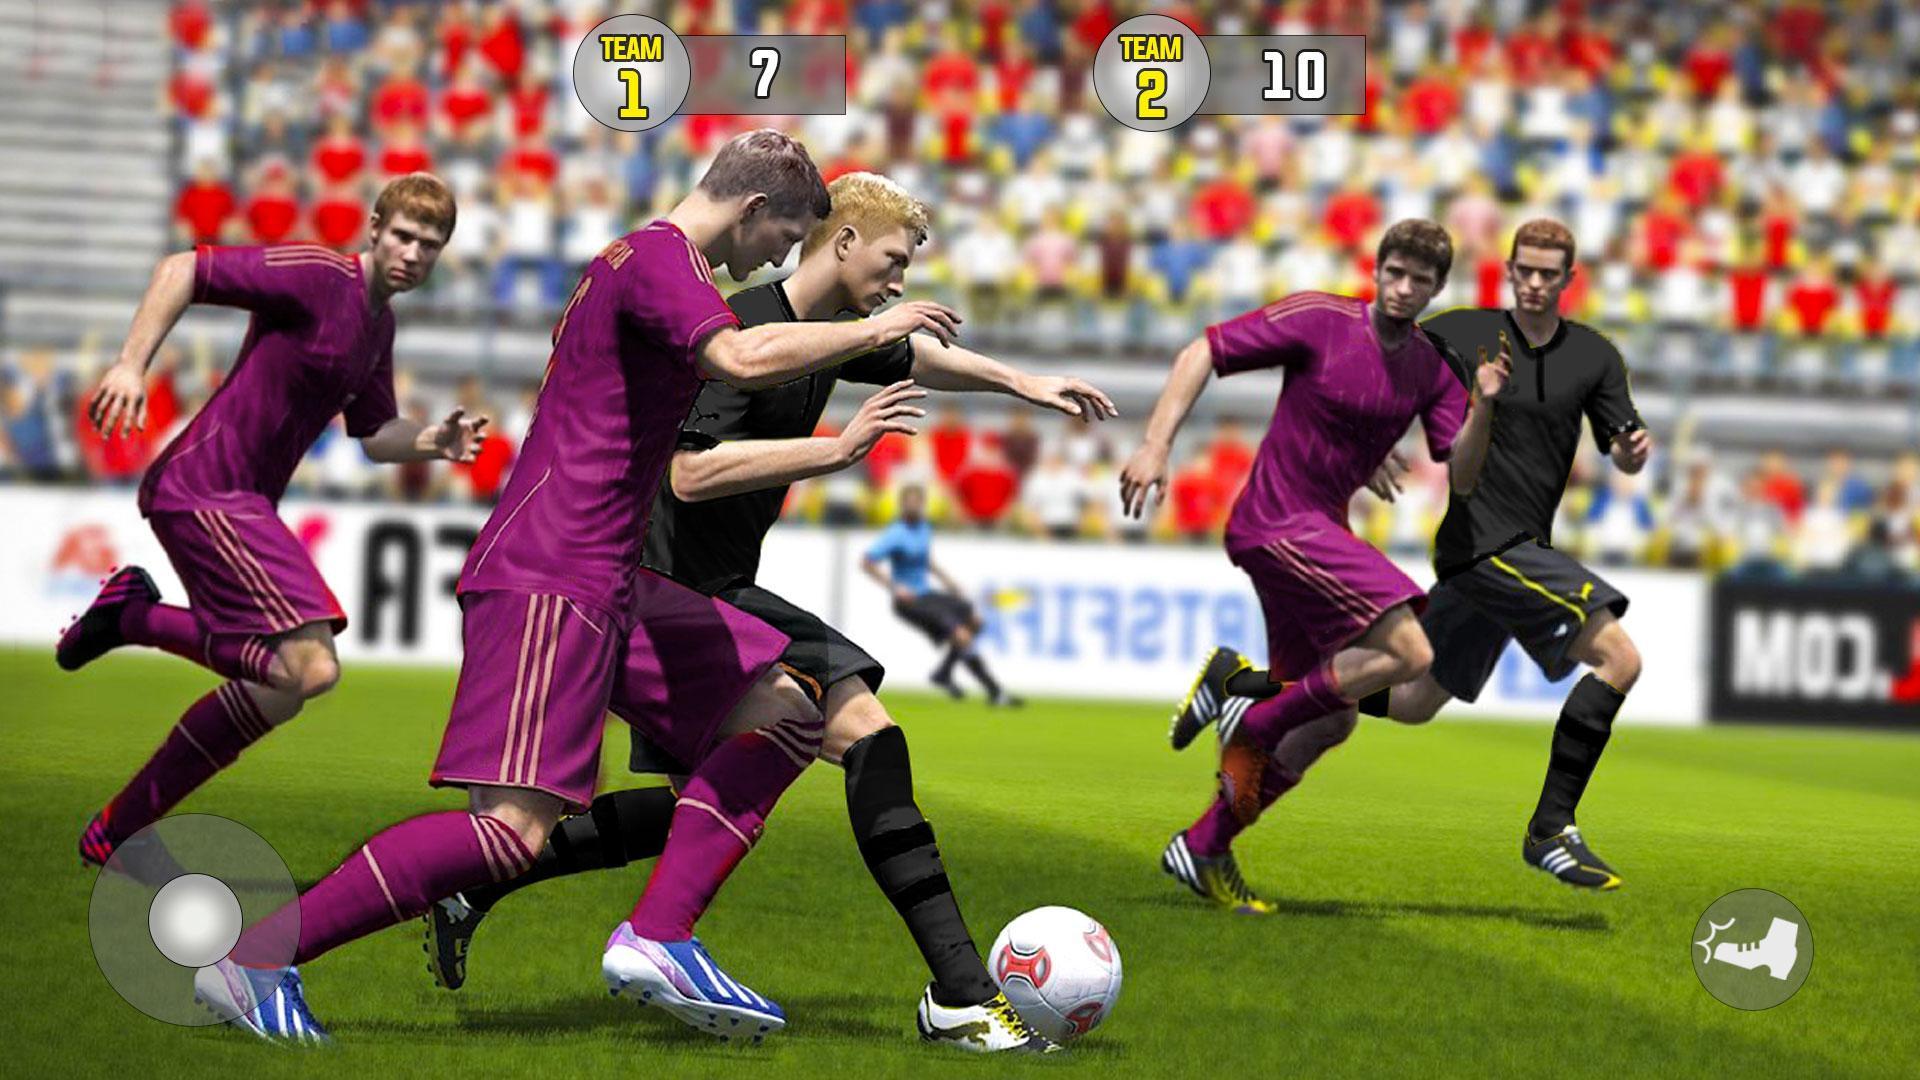 Super Soccer Boy Manager Kick Football Star For Android Apk Download